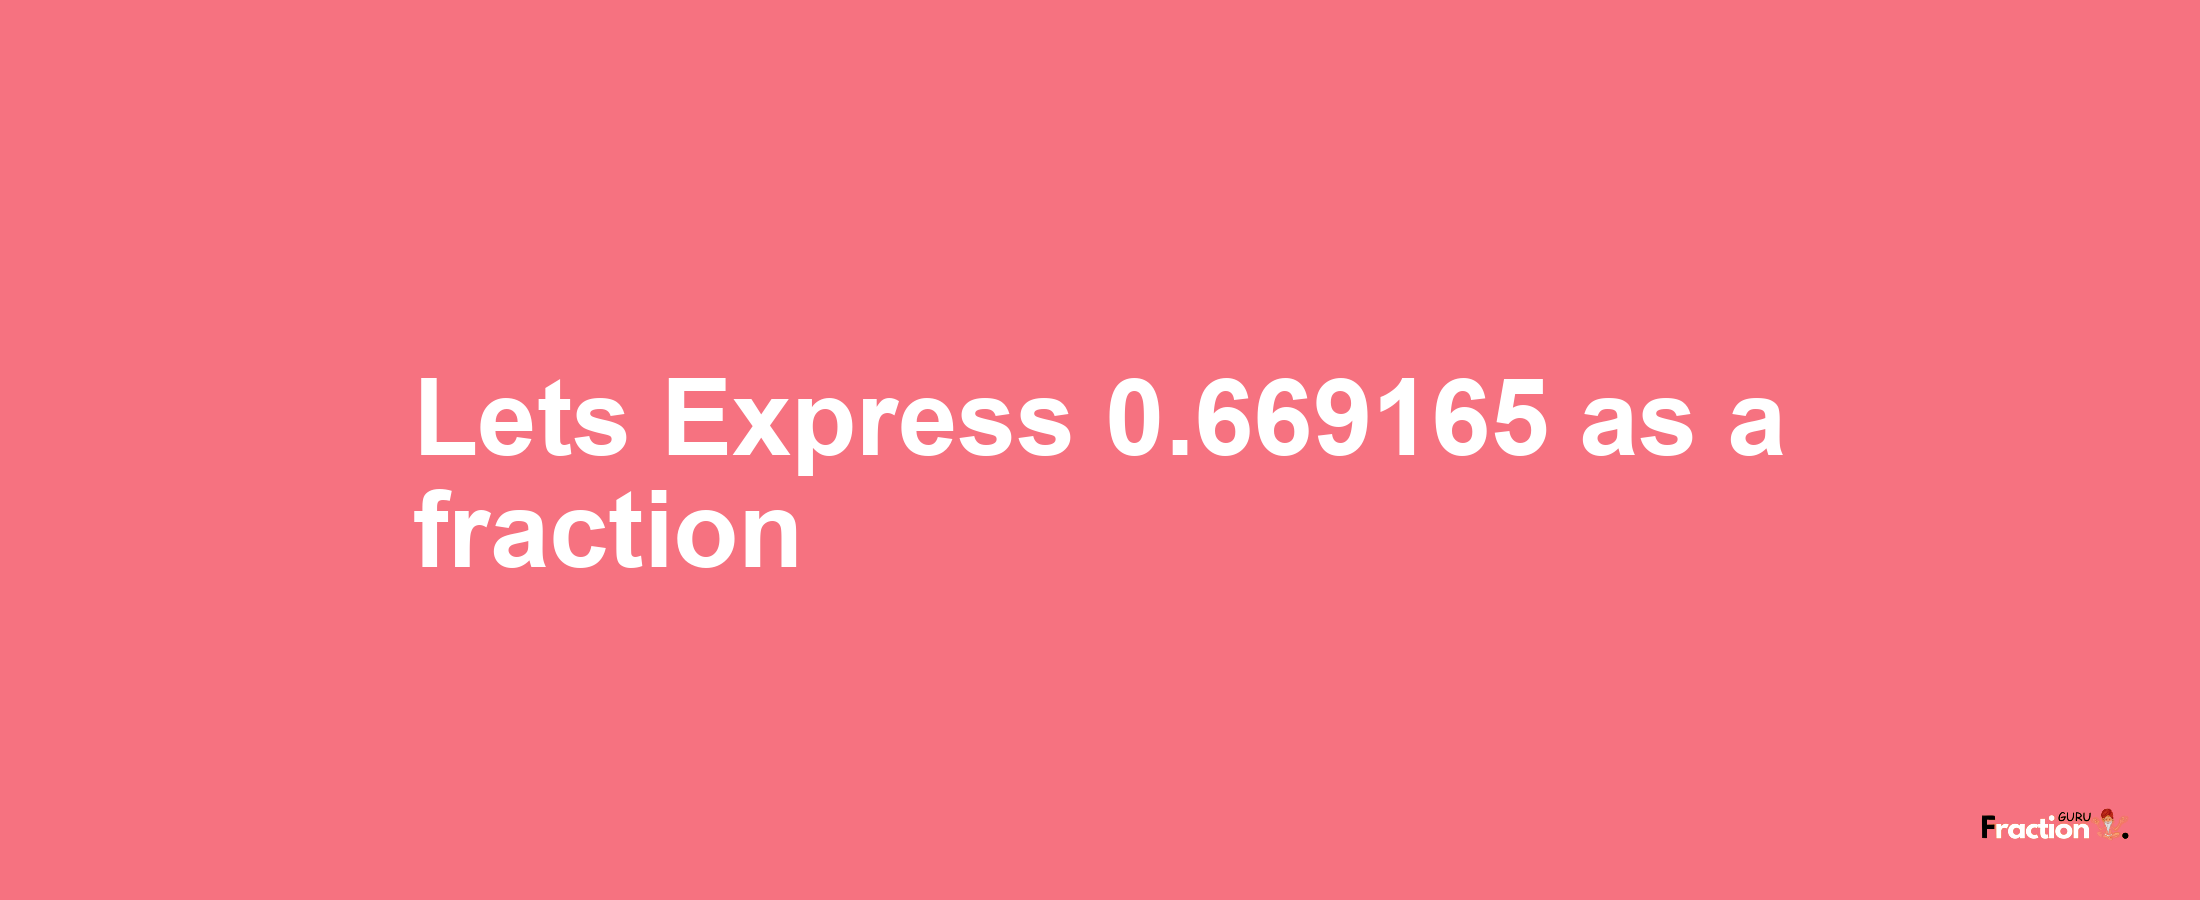 Lets Express 0.669165 as afraction